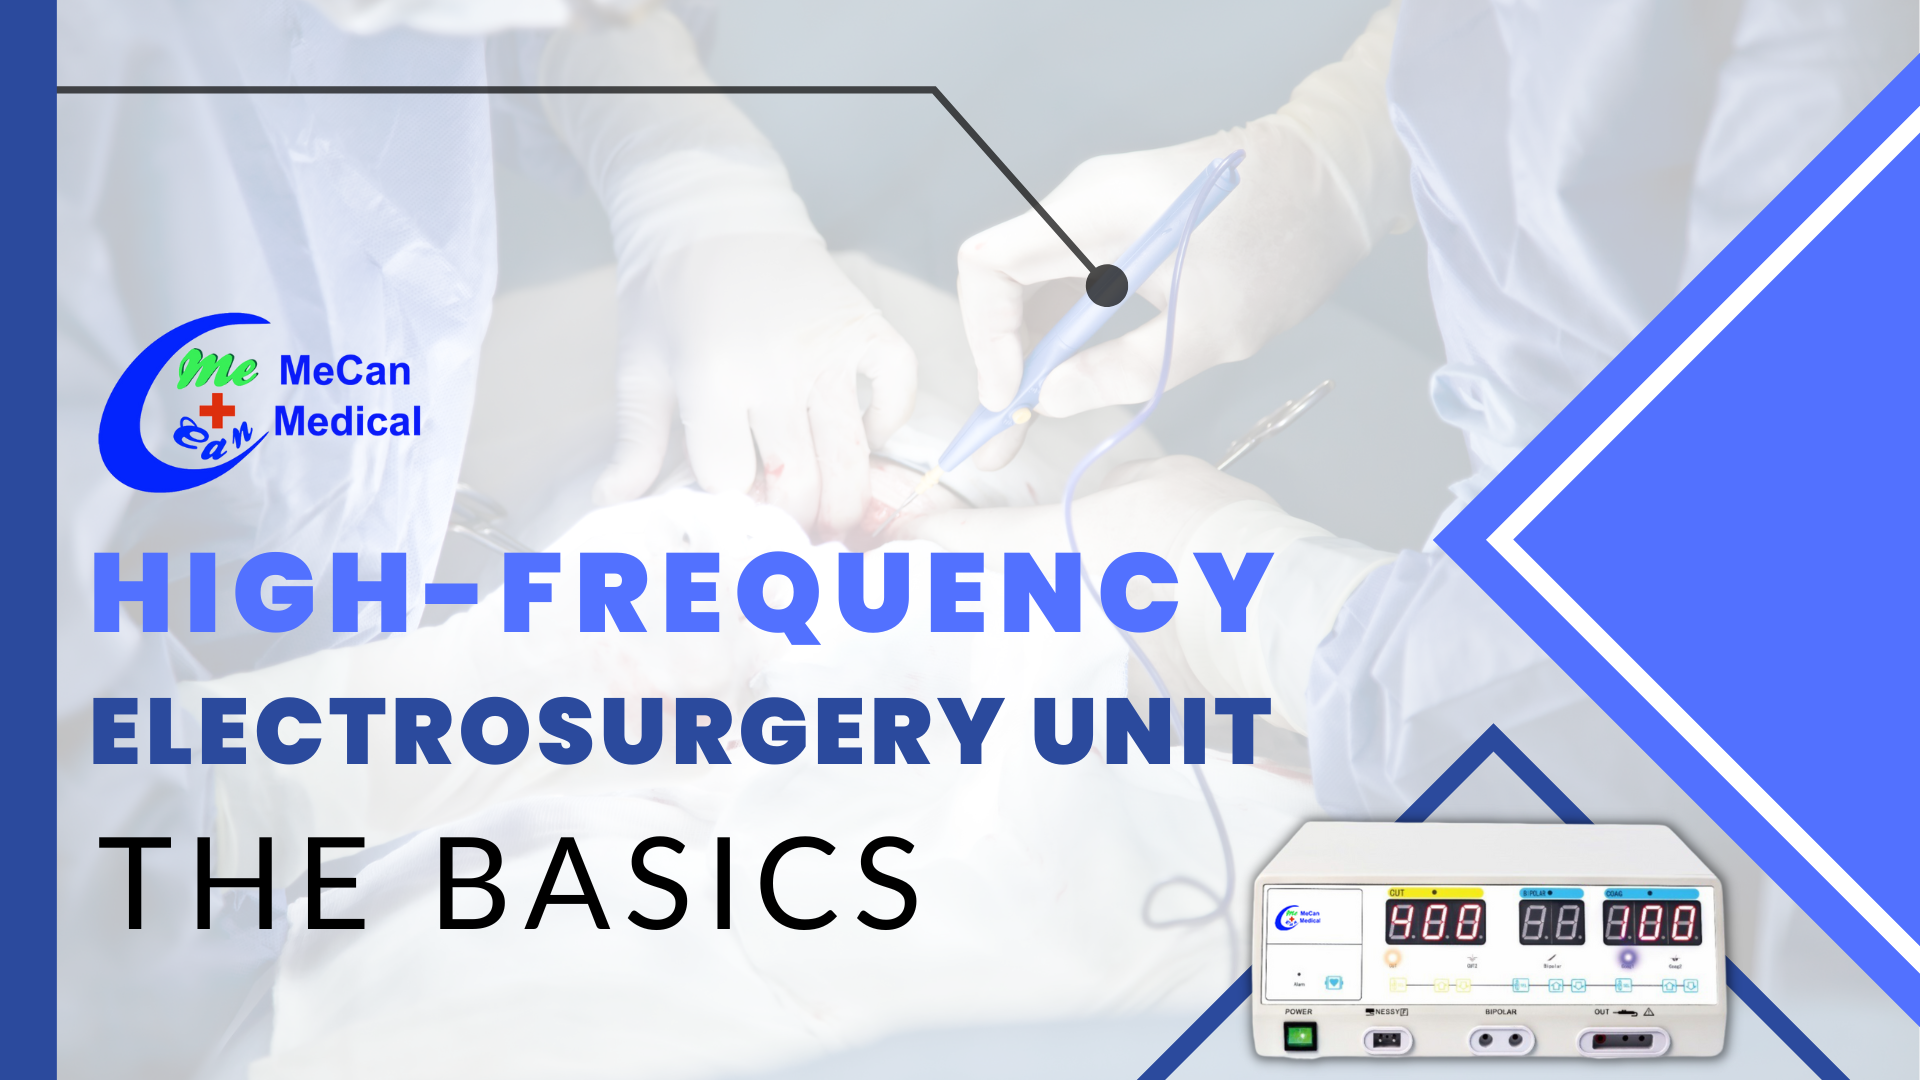 High-frequency Electrosurgery Unit - The Basics